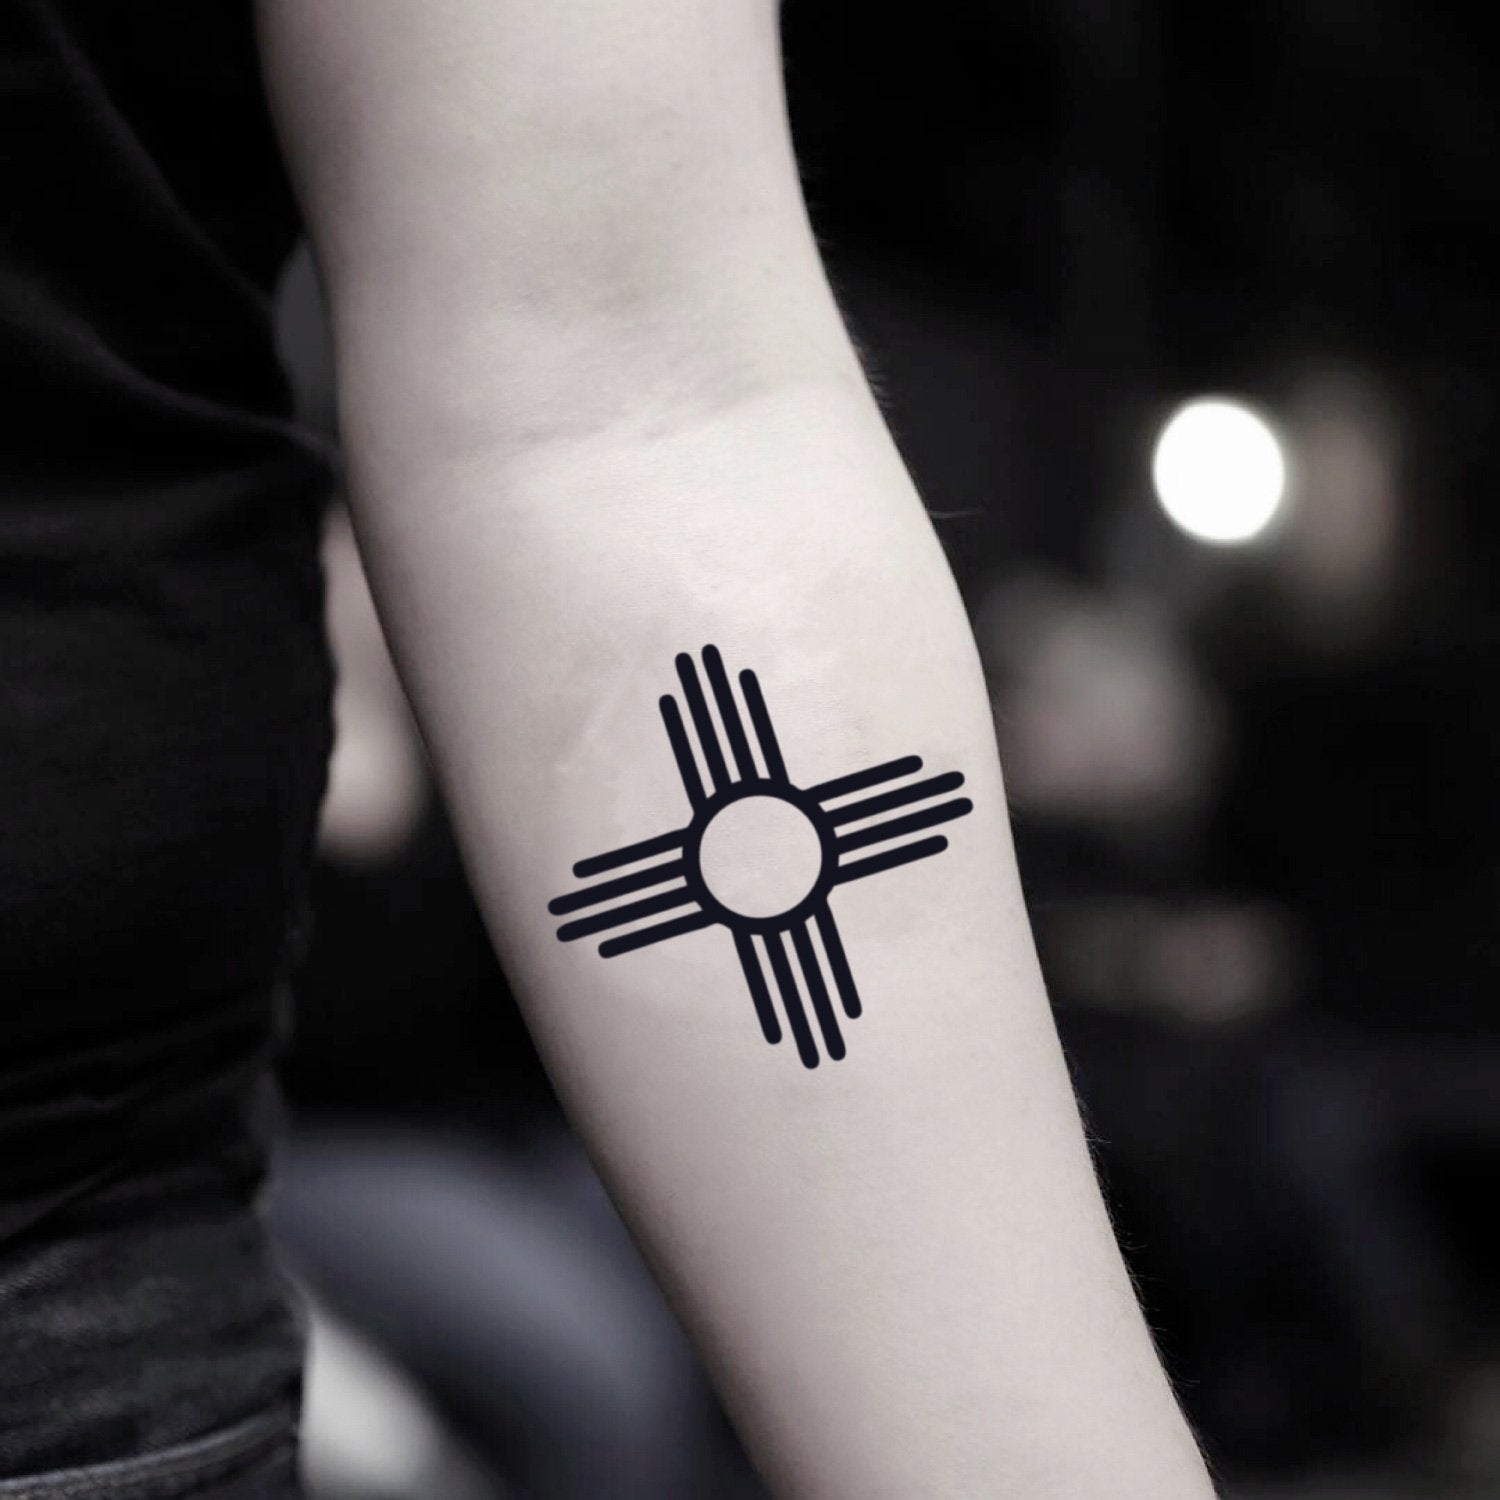 Native American Tattoos - Animal Spirits, Arrows & Feathers [2023 Guide] -  Tattoo Stylist